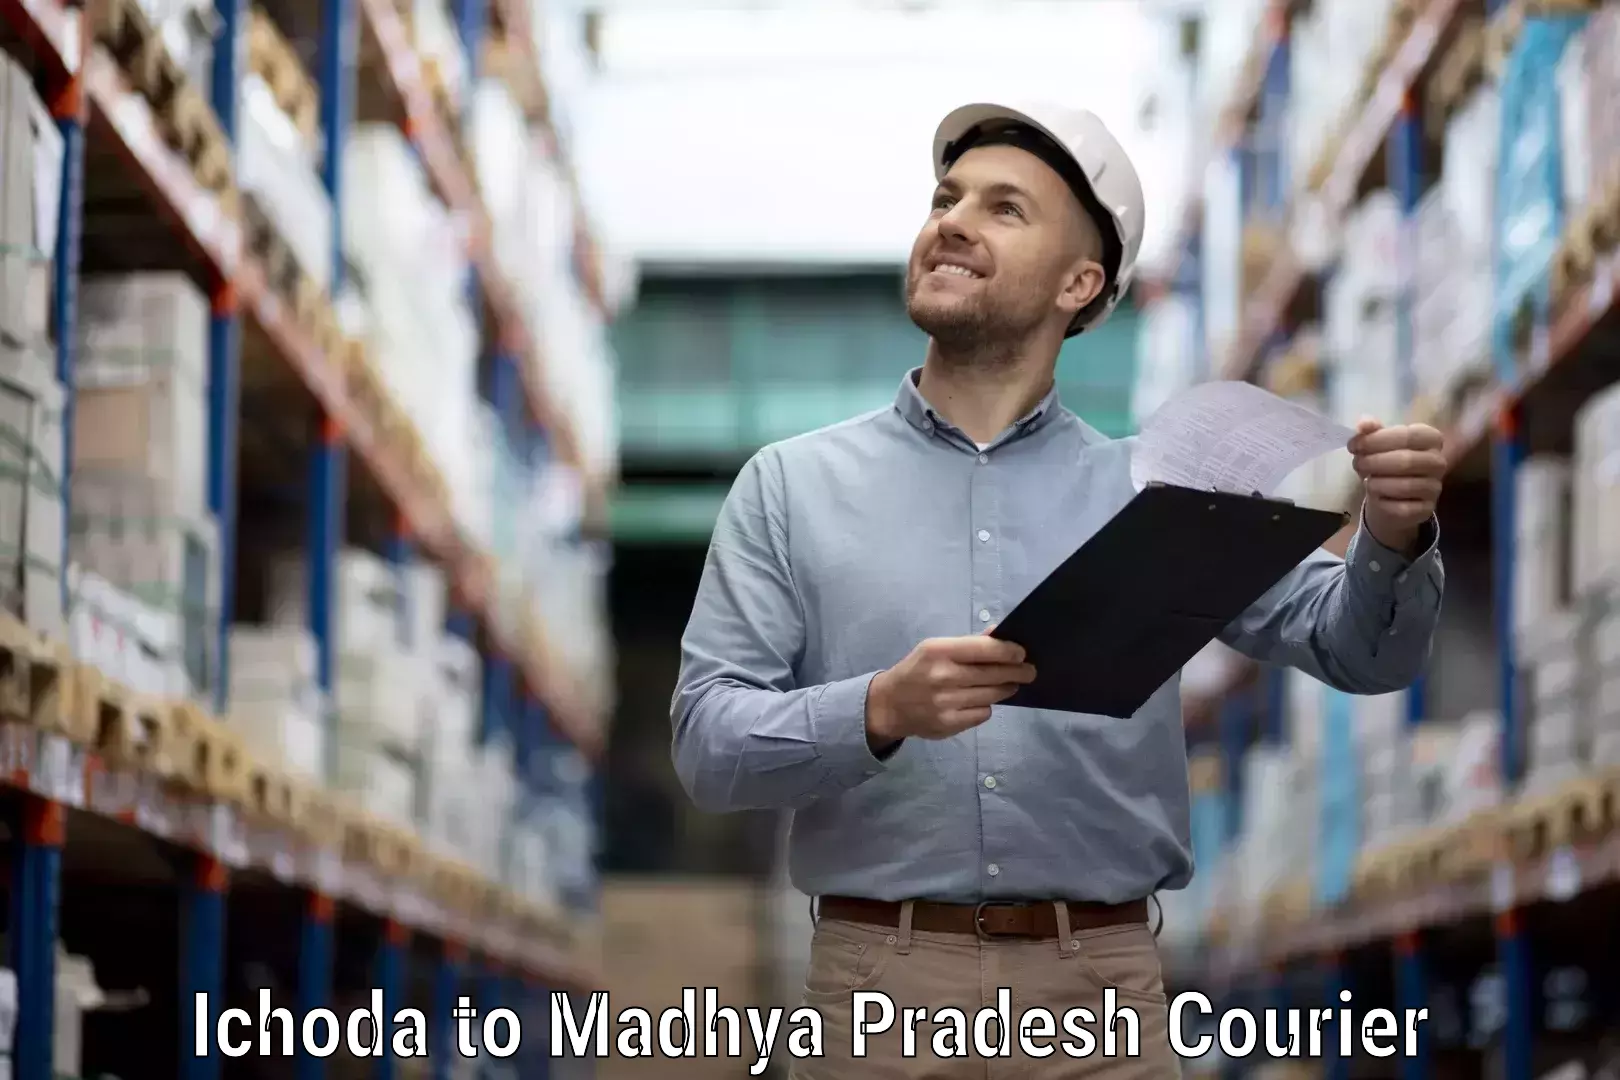 Customer-focused courier Ichoda to Athner